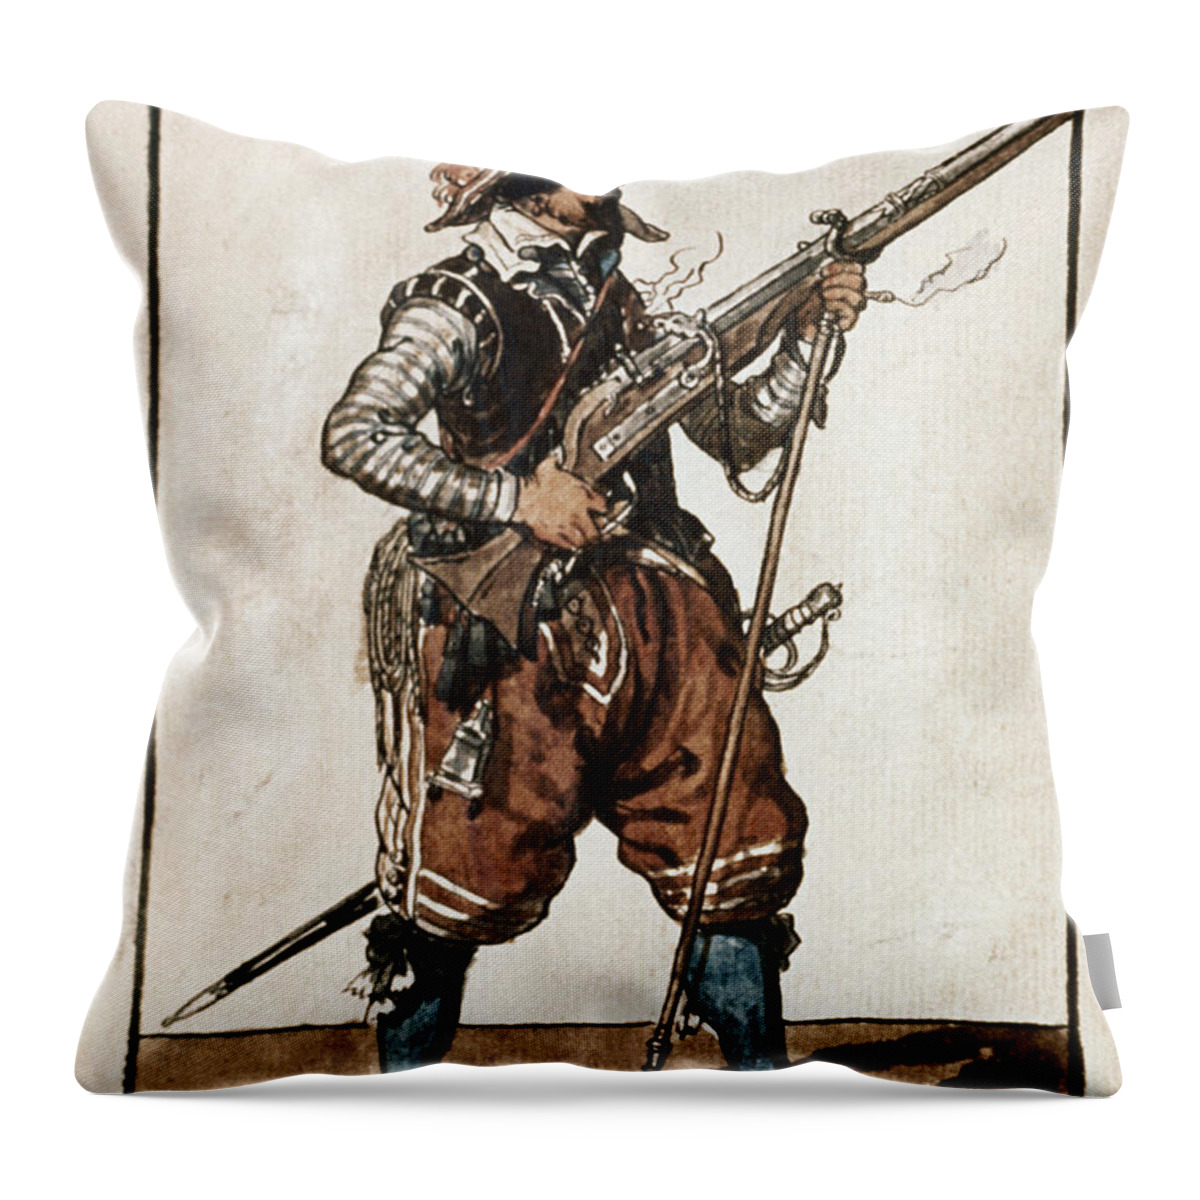 1608 Throw Pillow featuring the drawing Musketeer, 1608 by Granger